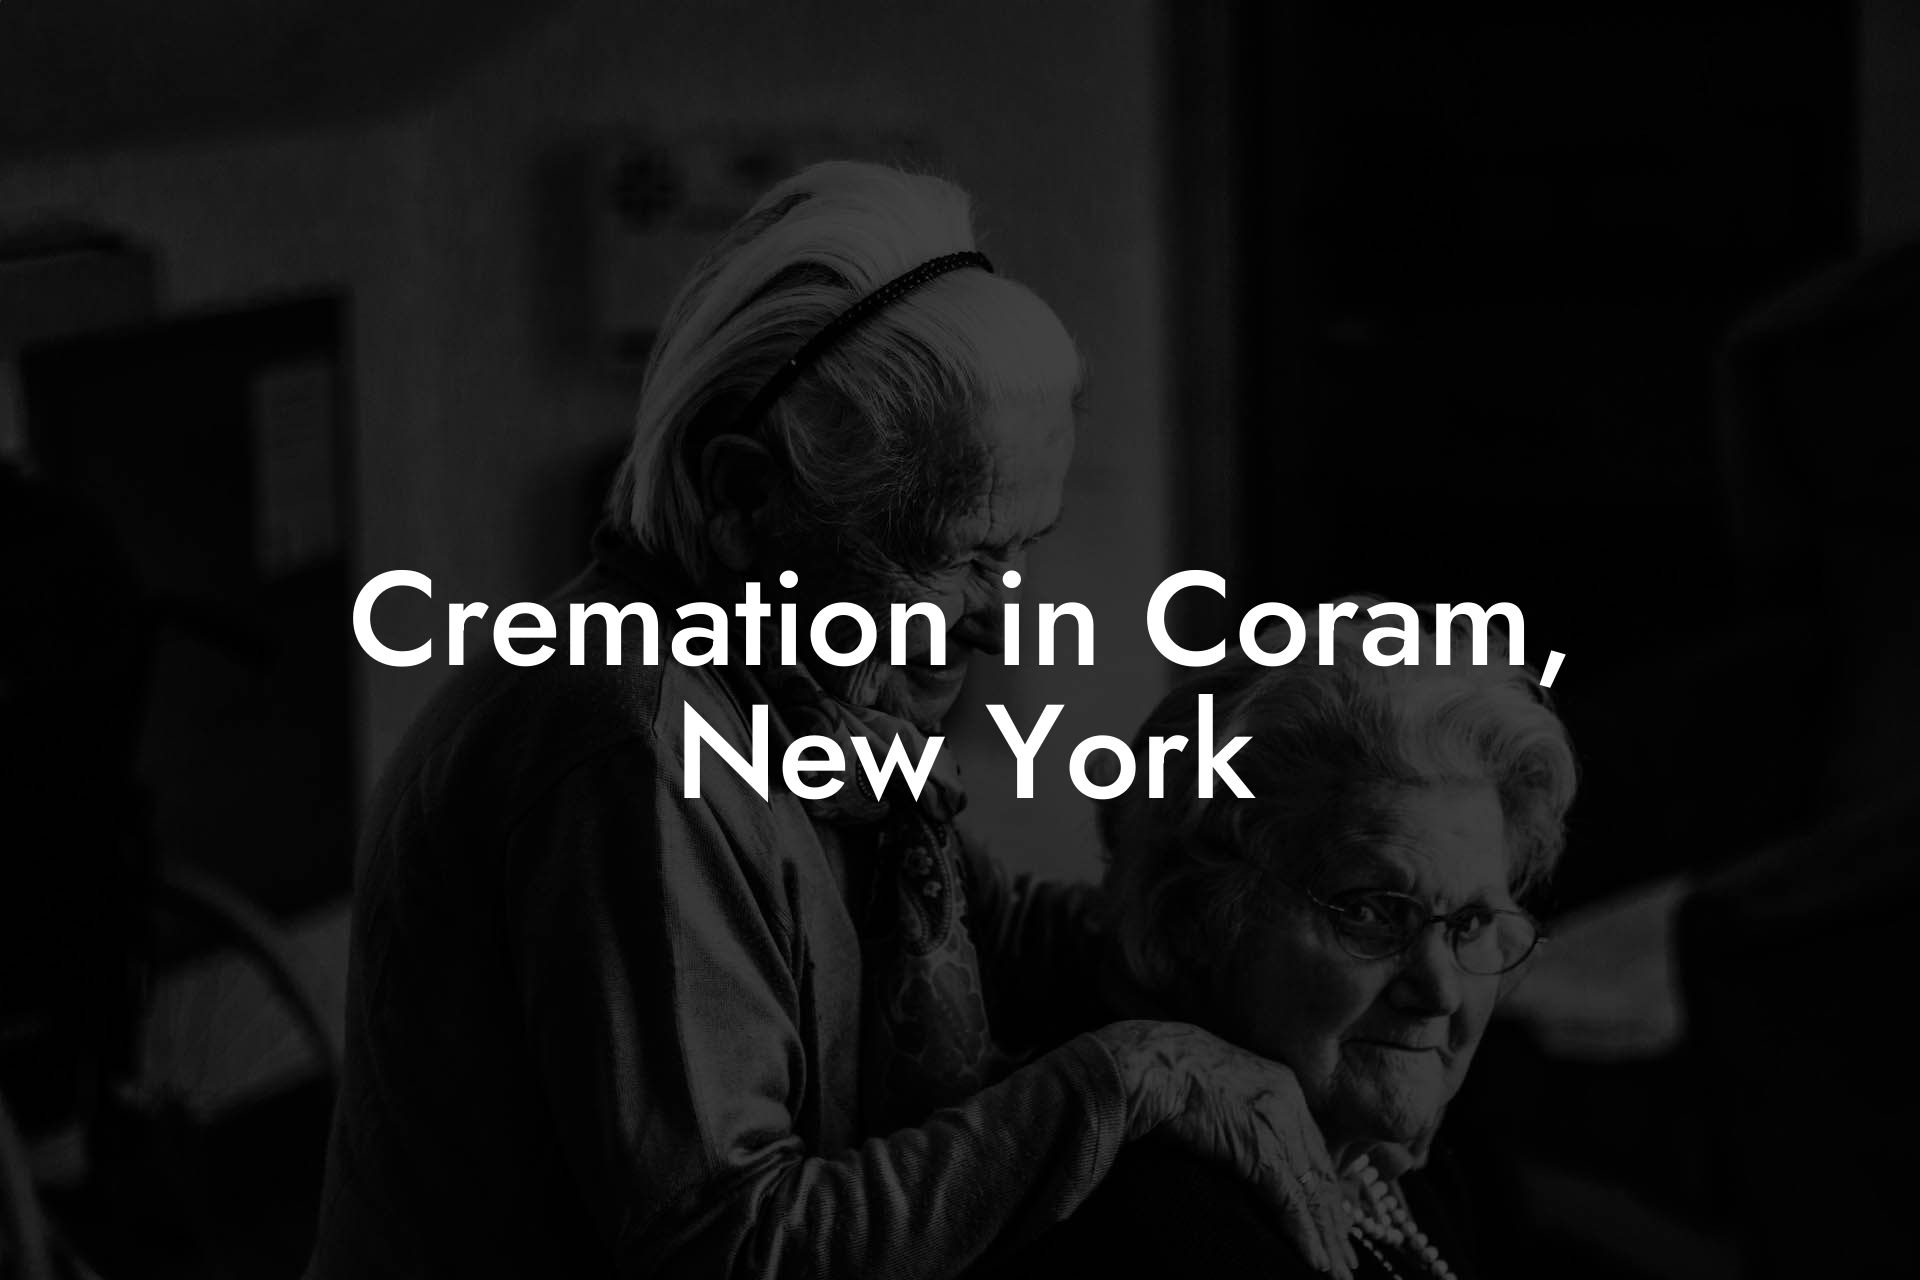 Cremation in Coram, New York